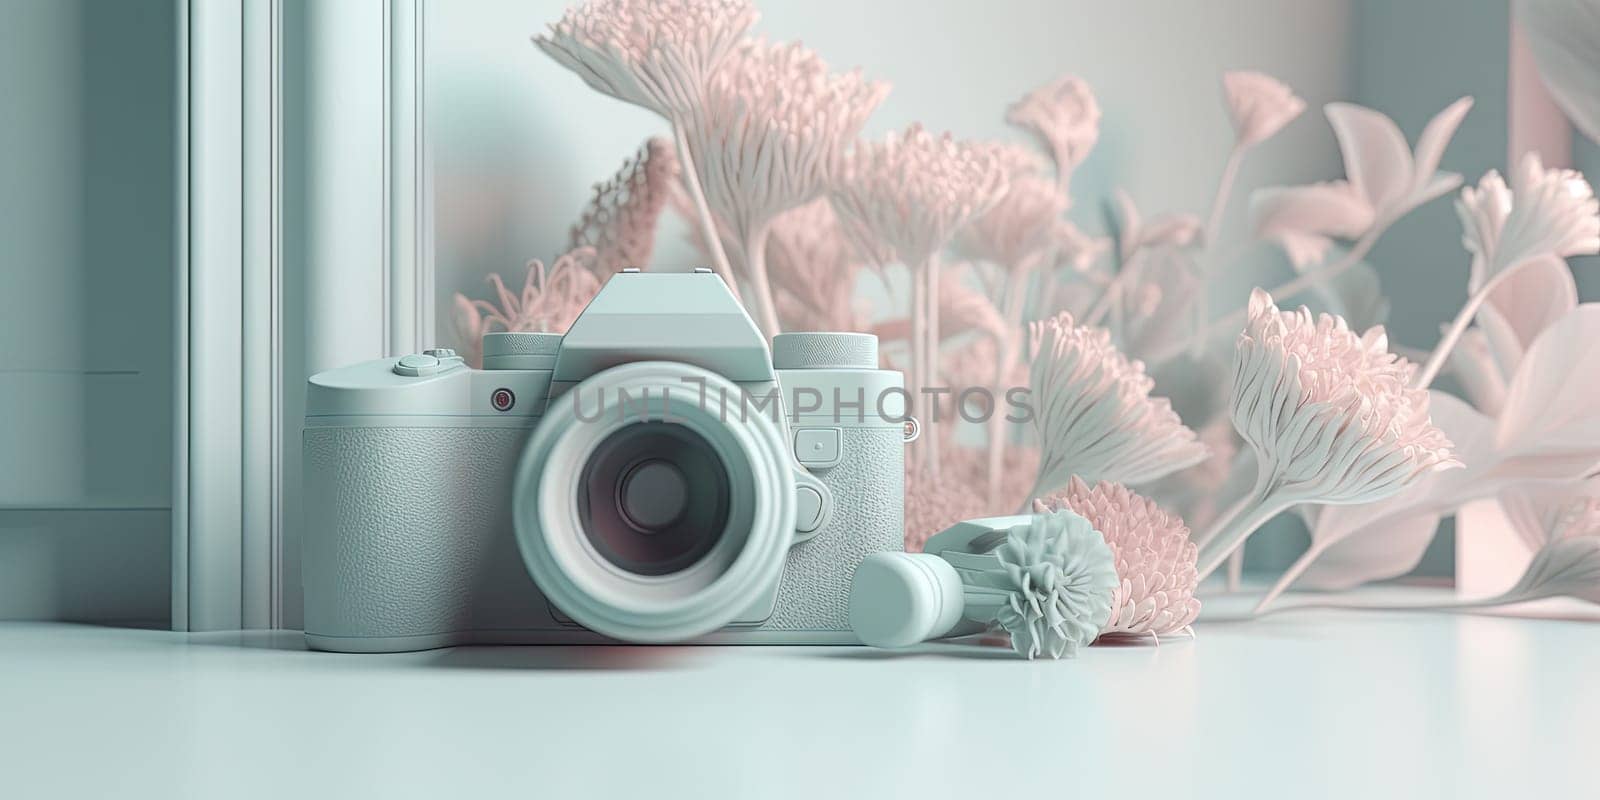 3D Illustration Retro Camera In Pastel Colors On A Table With Flowers